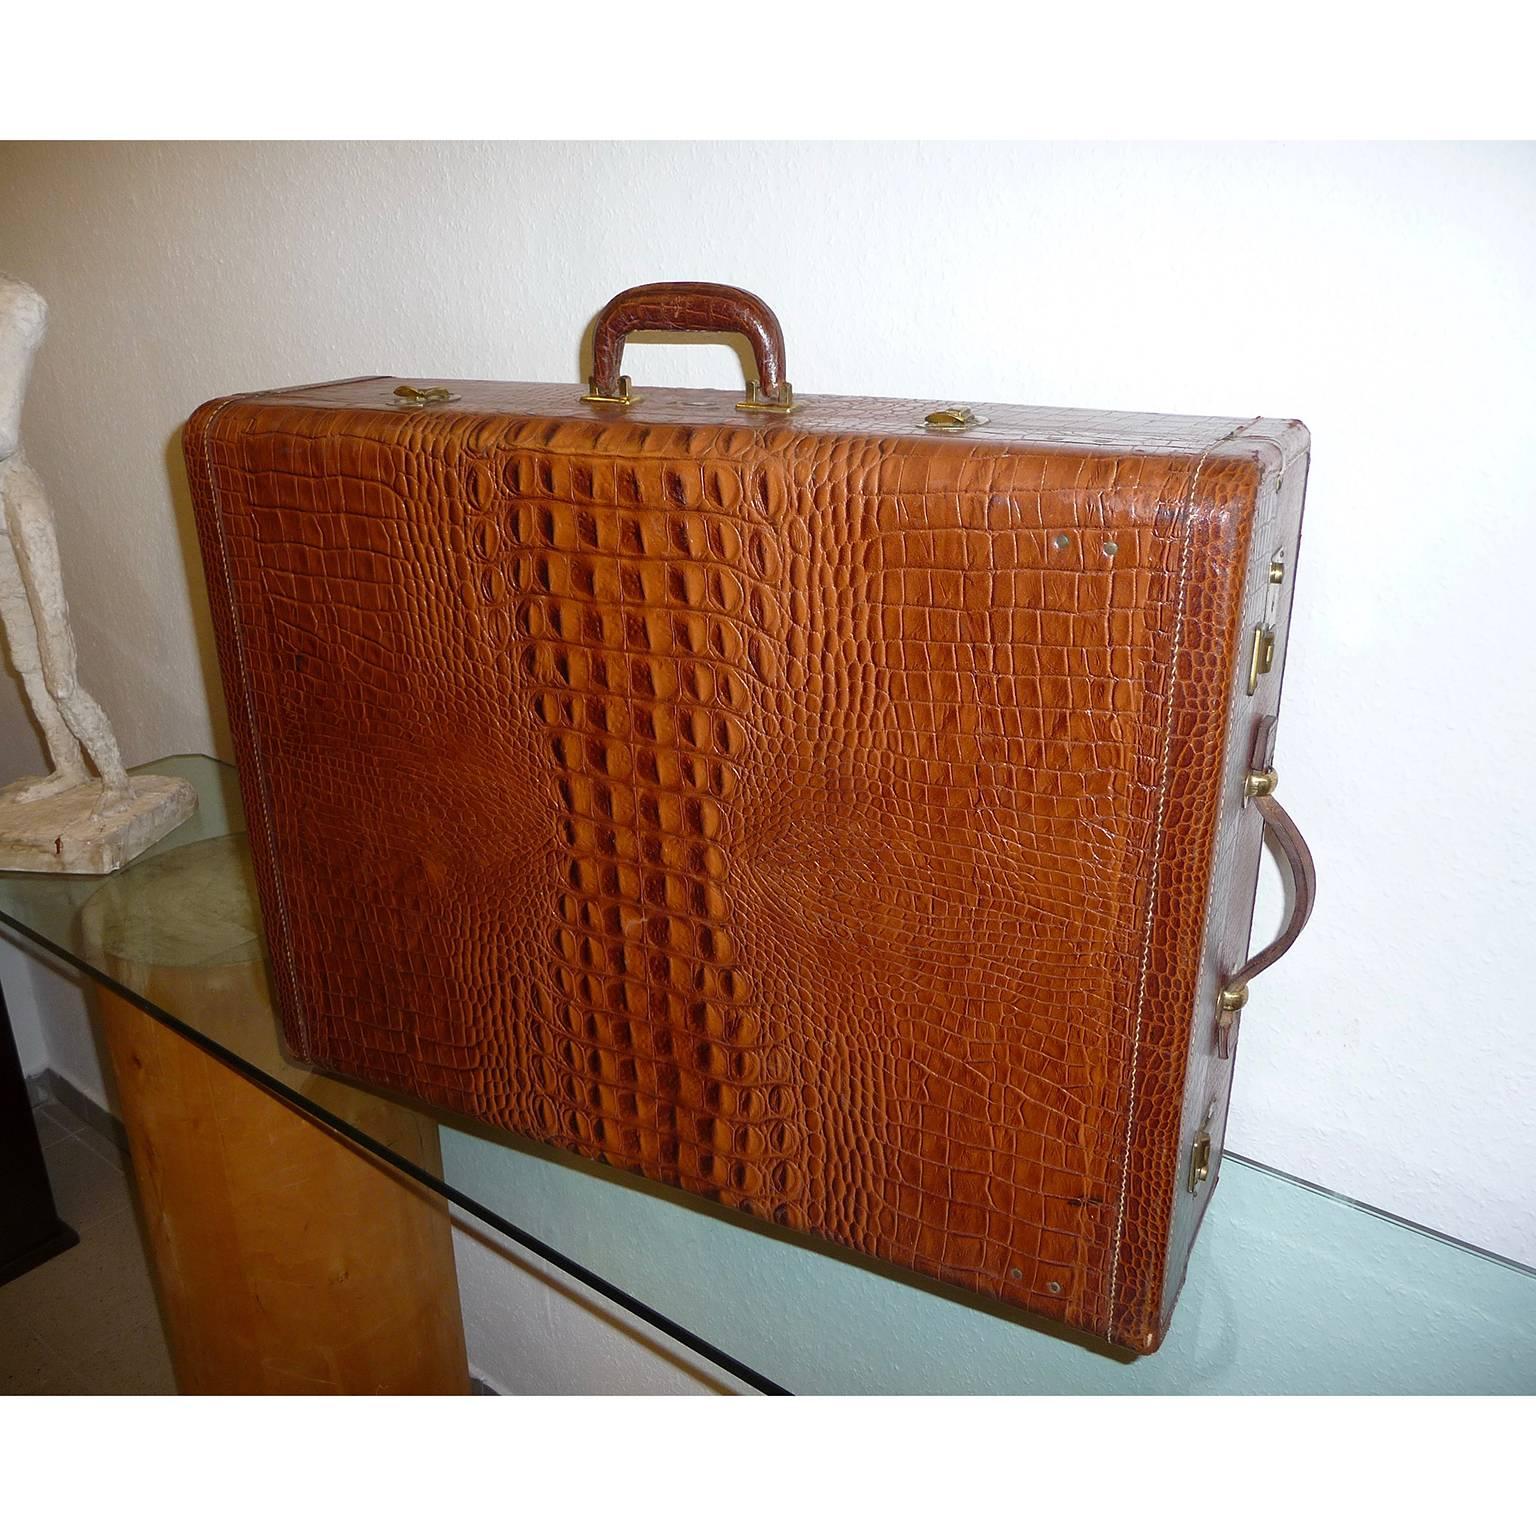 An Eveleigh alligator look vintage leather luggage, extremely decorative.
Light body covered with alligator patterned cow leather. Under the handle a brass plate with company logo. Luxury finish with compartment divisions. All straps and clasps are